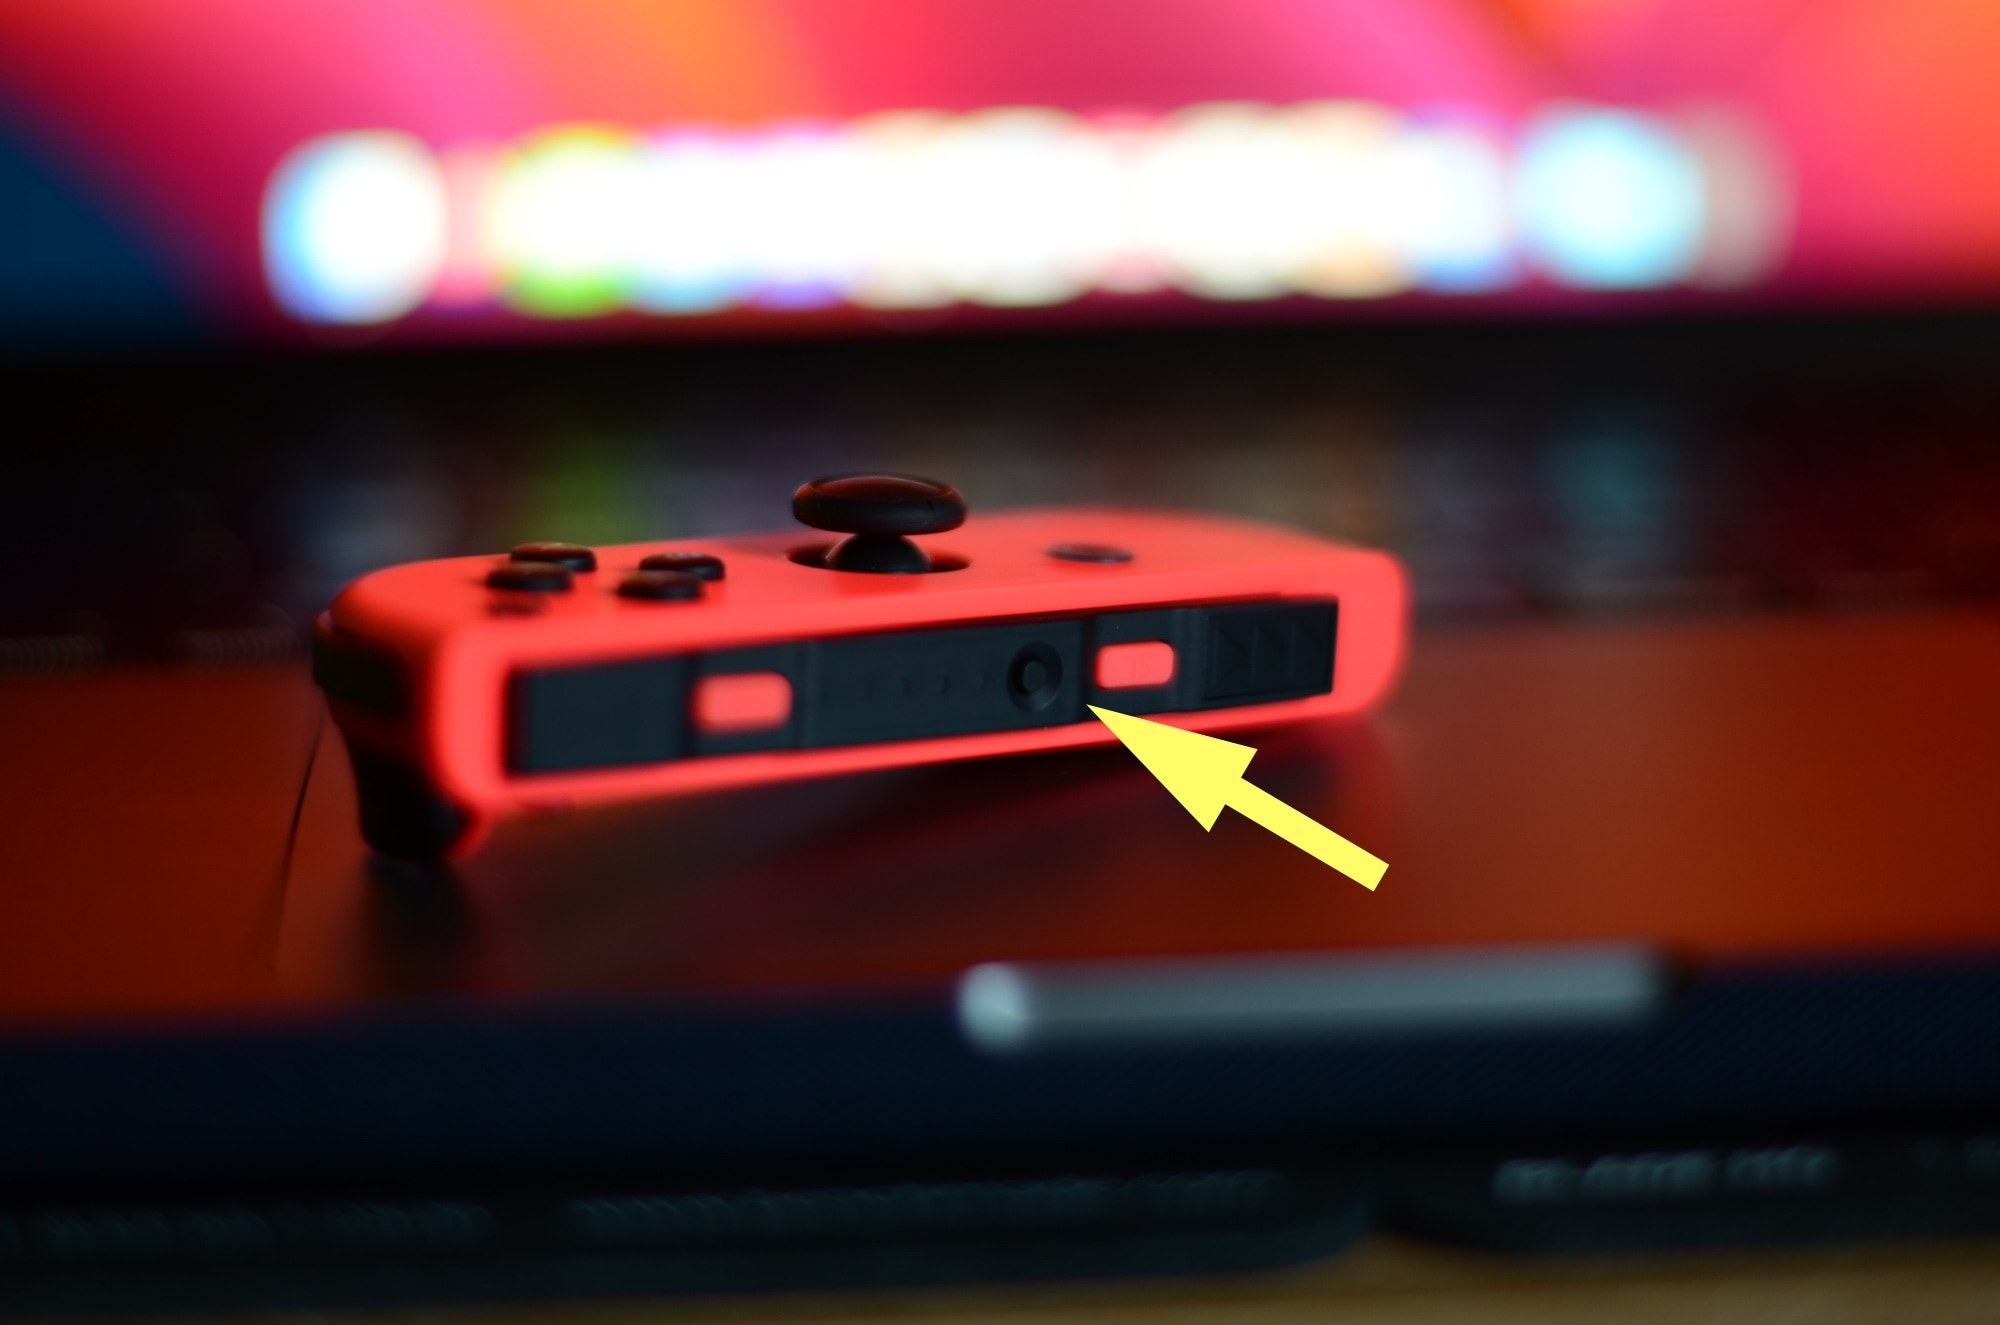 Press and hold the Nintendo Joy Con's pairing button.